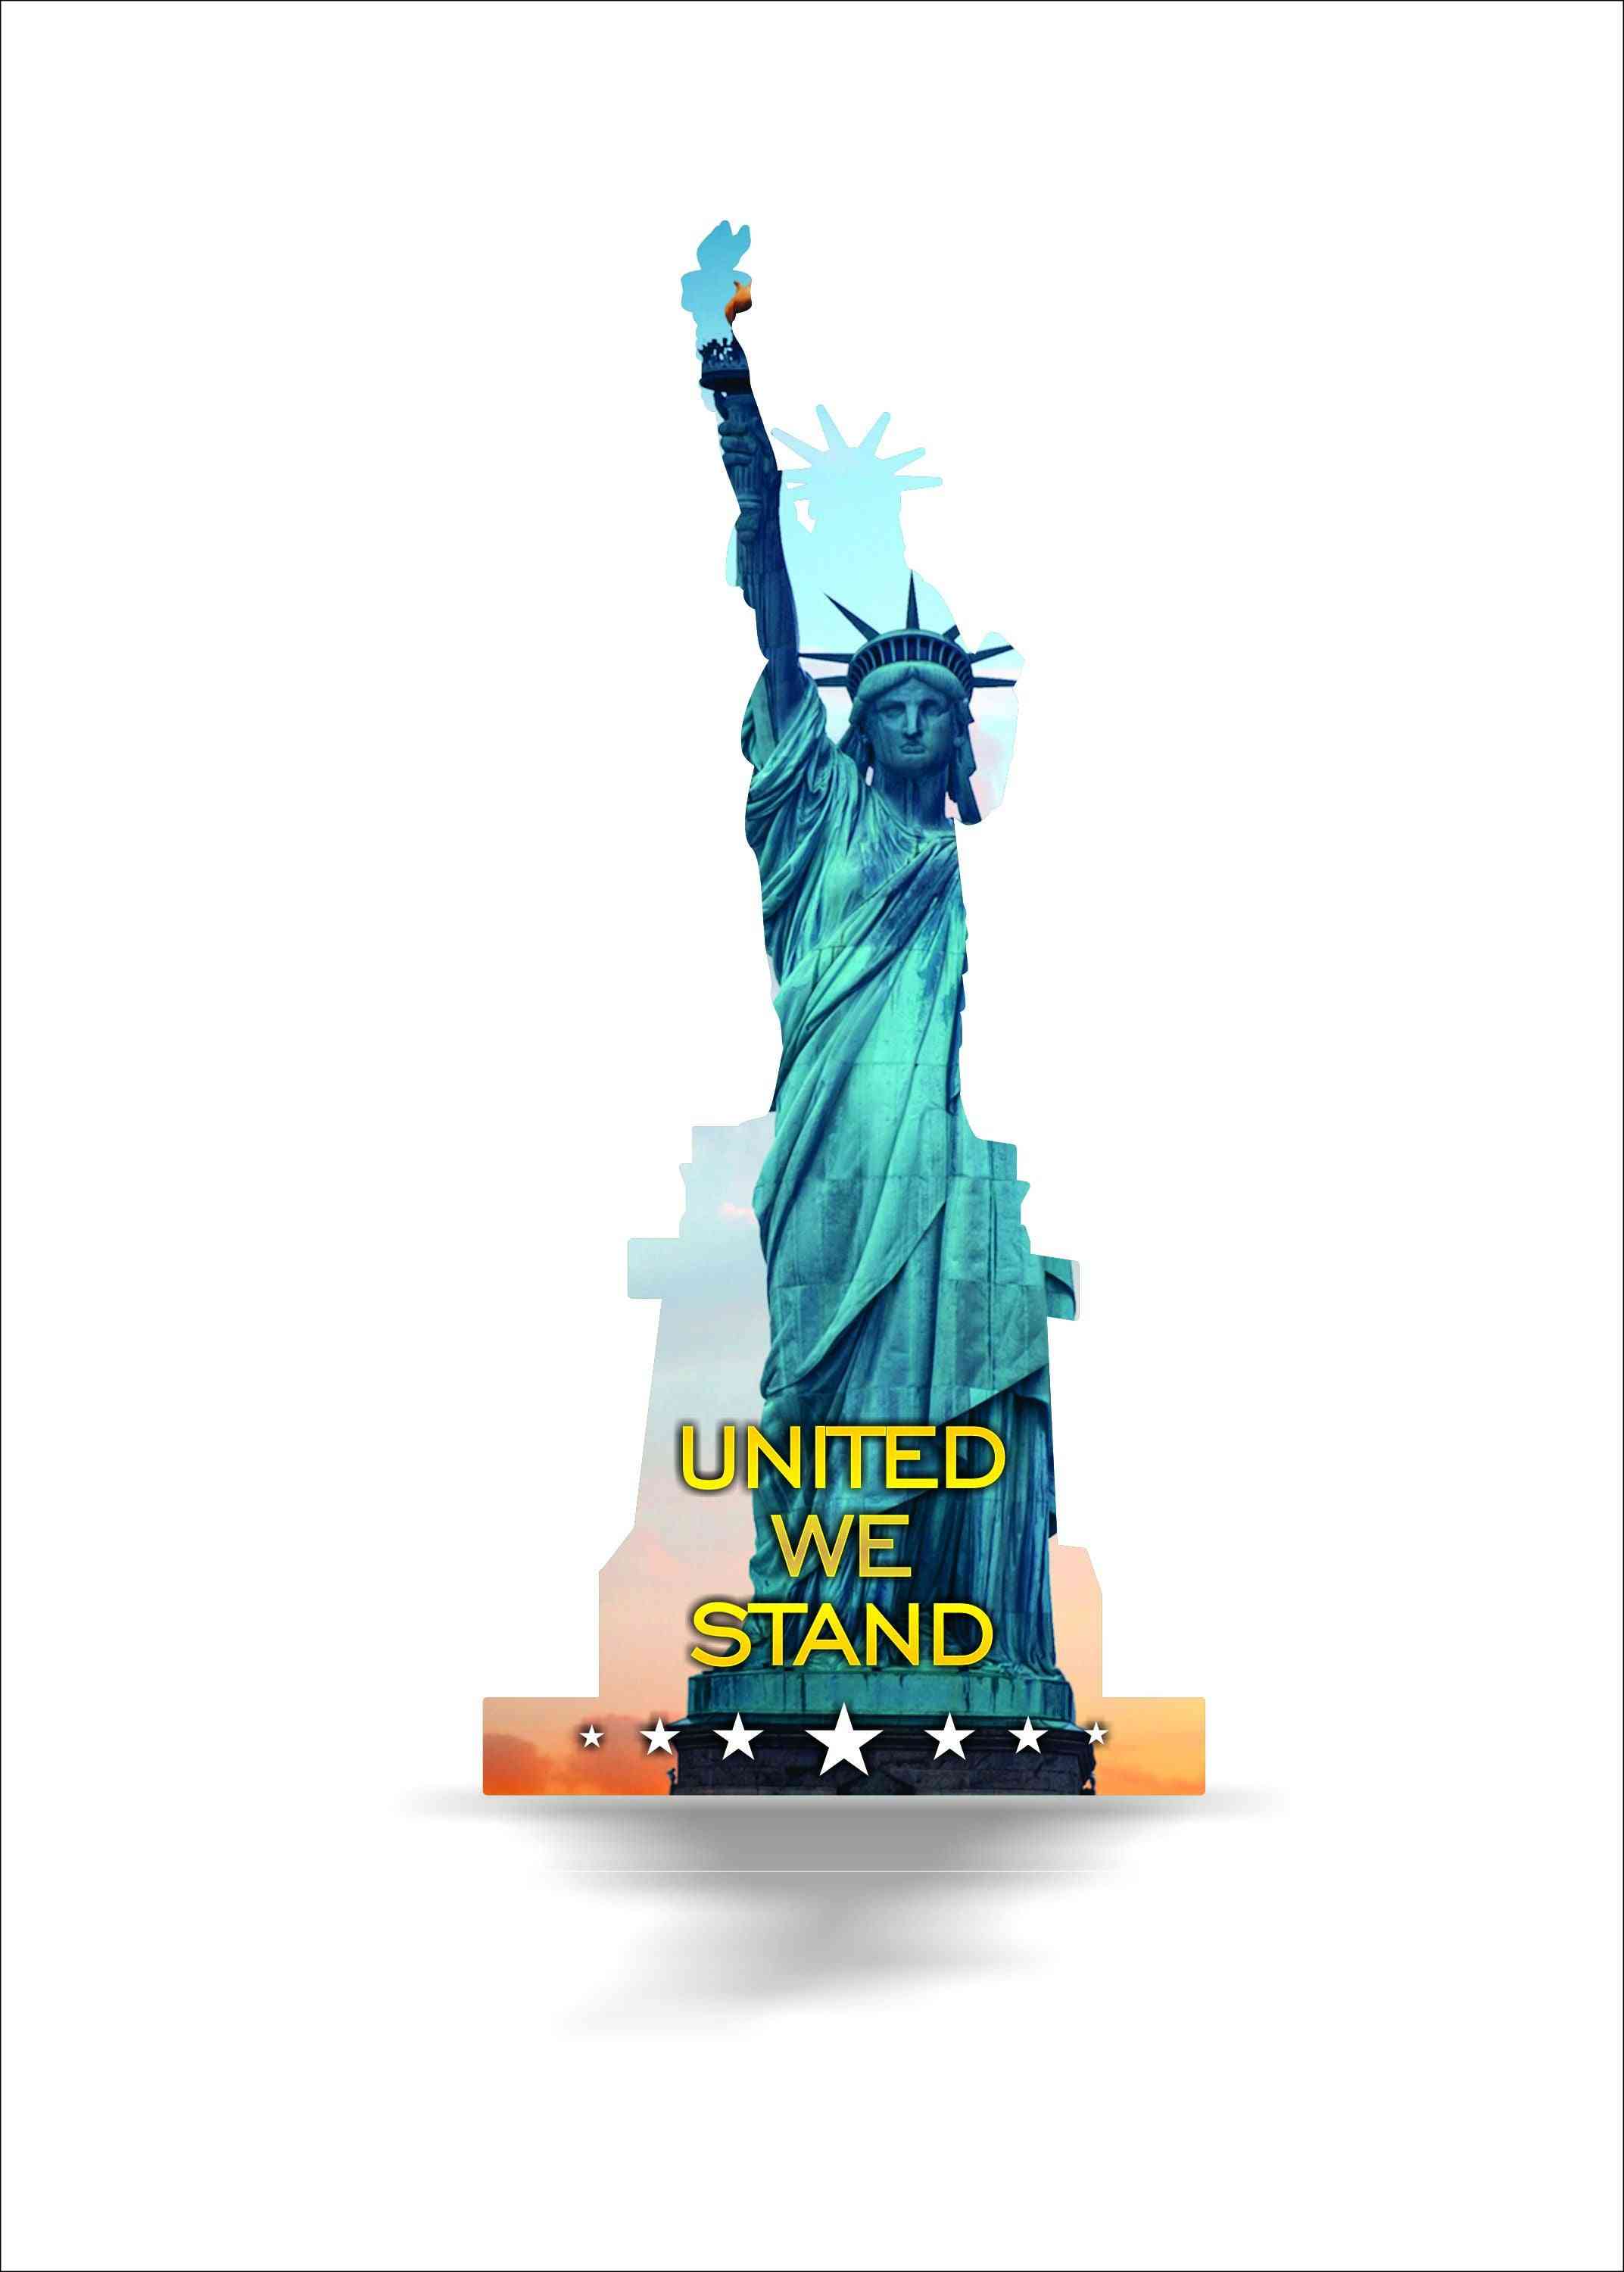 Statue Of Liberty - United We Stand Imagery